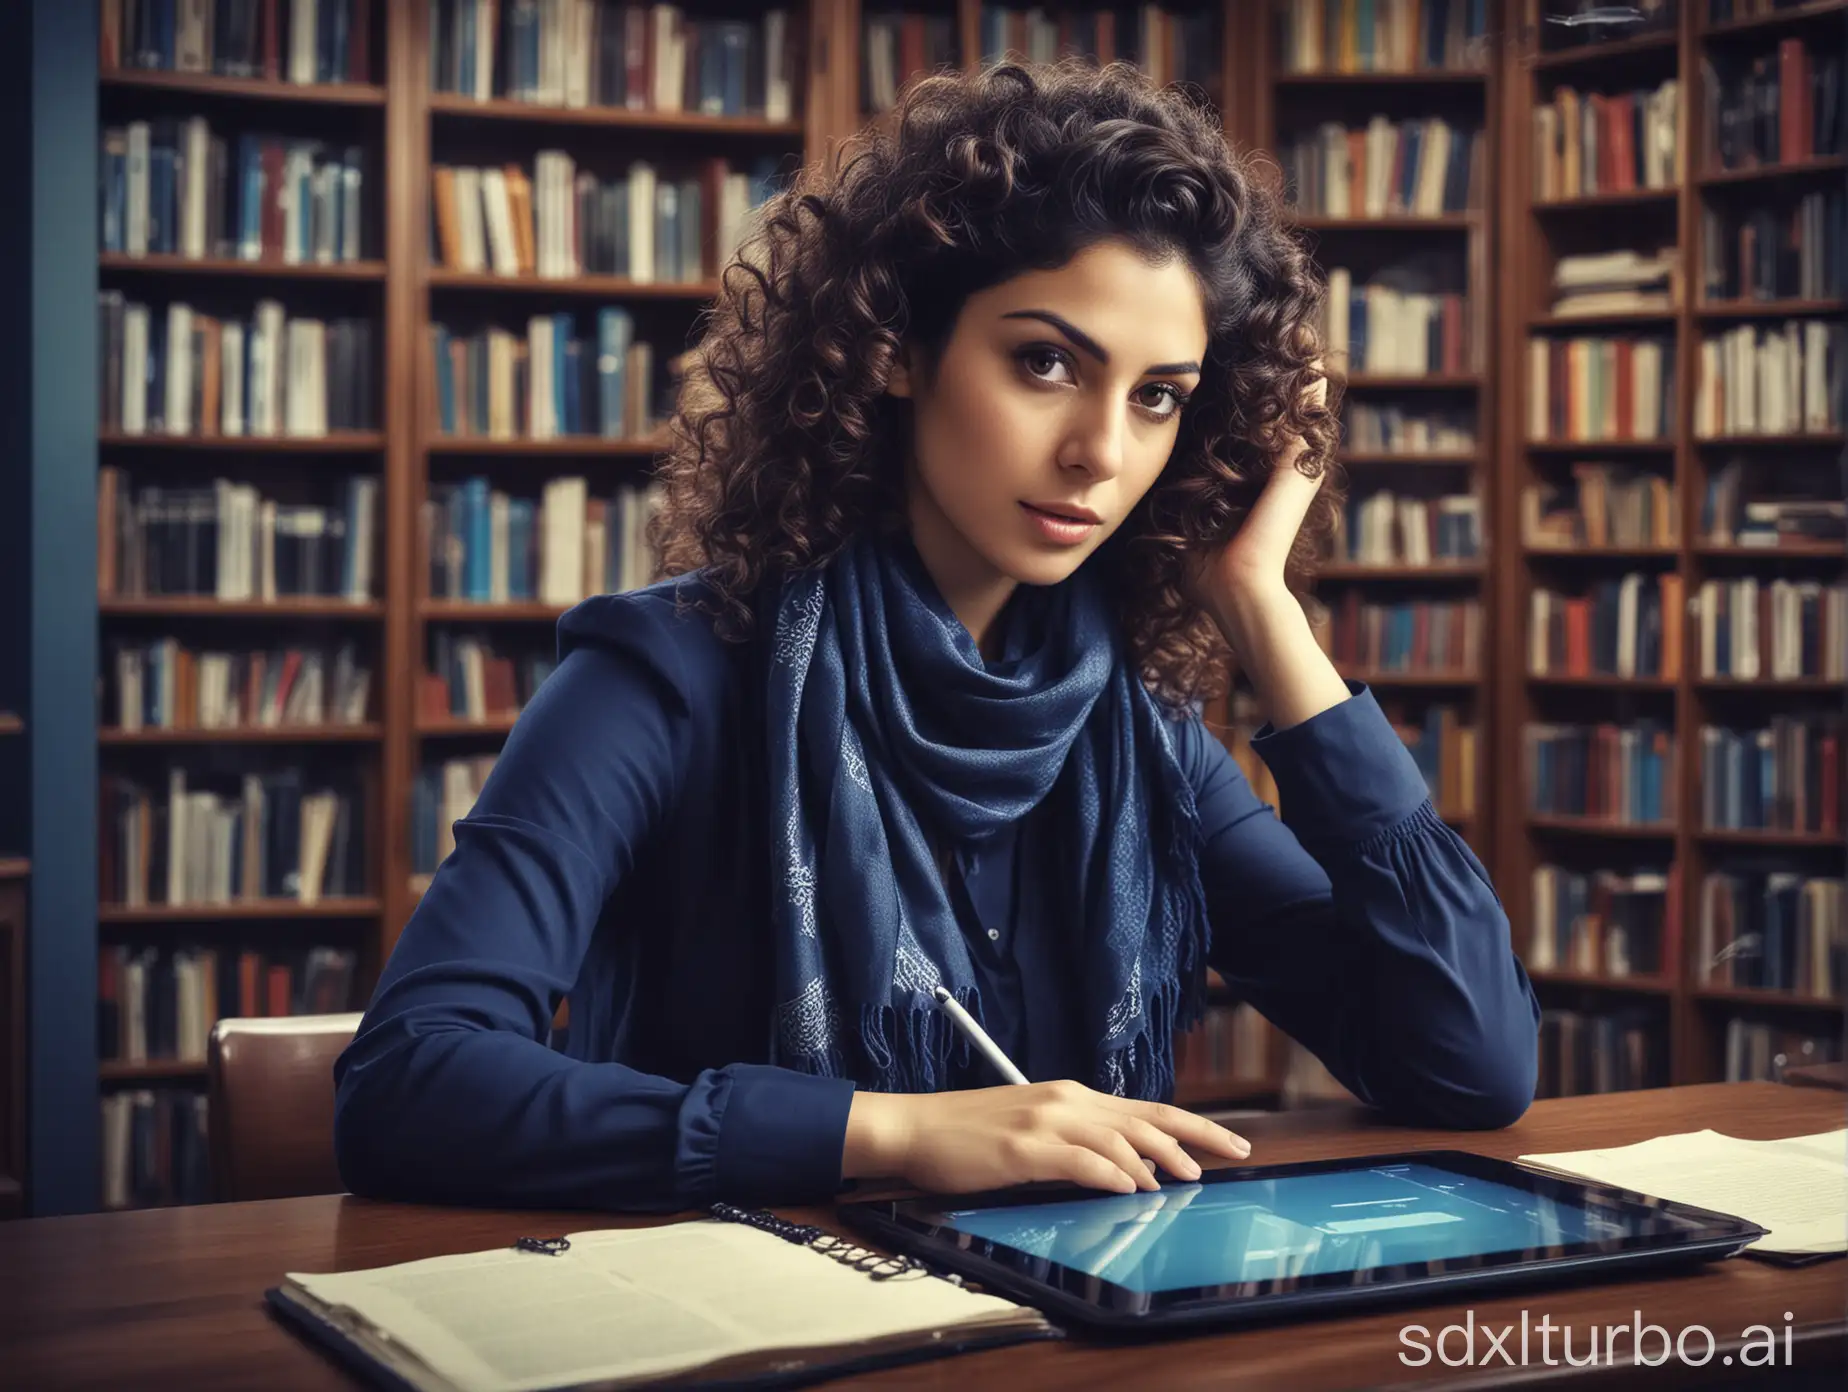 Elegant-Iranian-Woman-Working-on-Surface-Tablet-in-Busy-Library